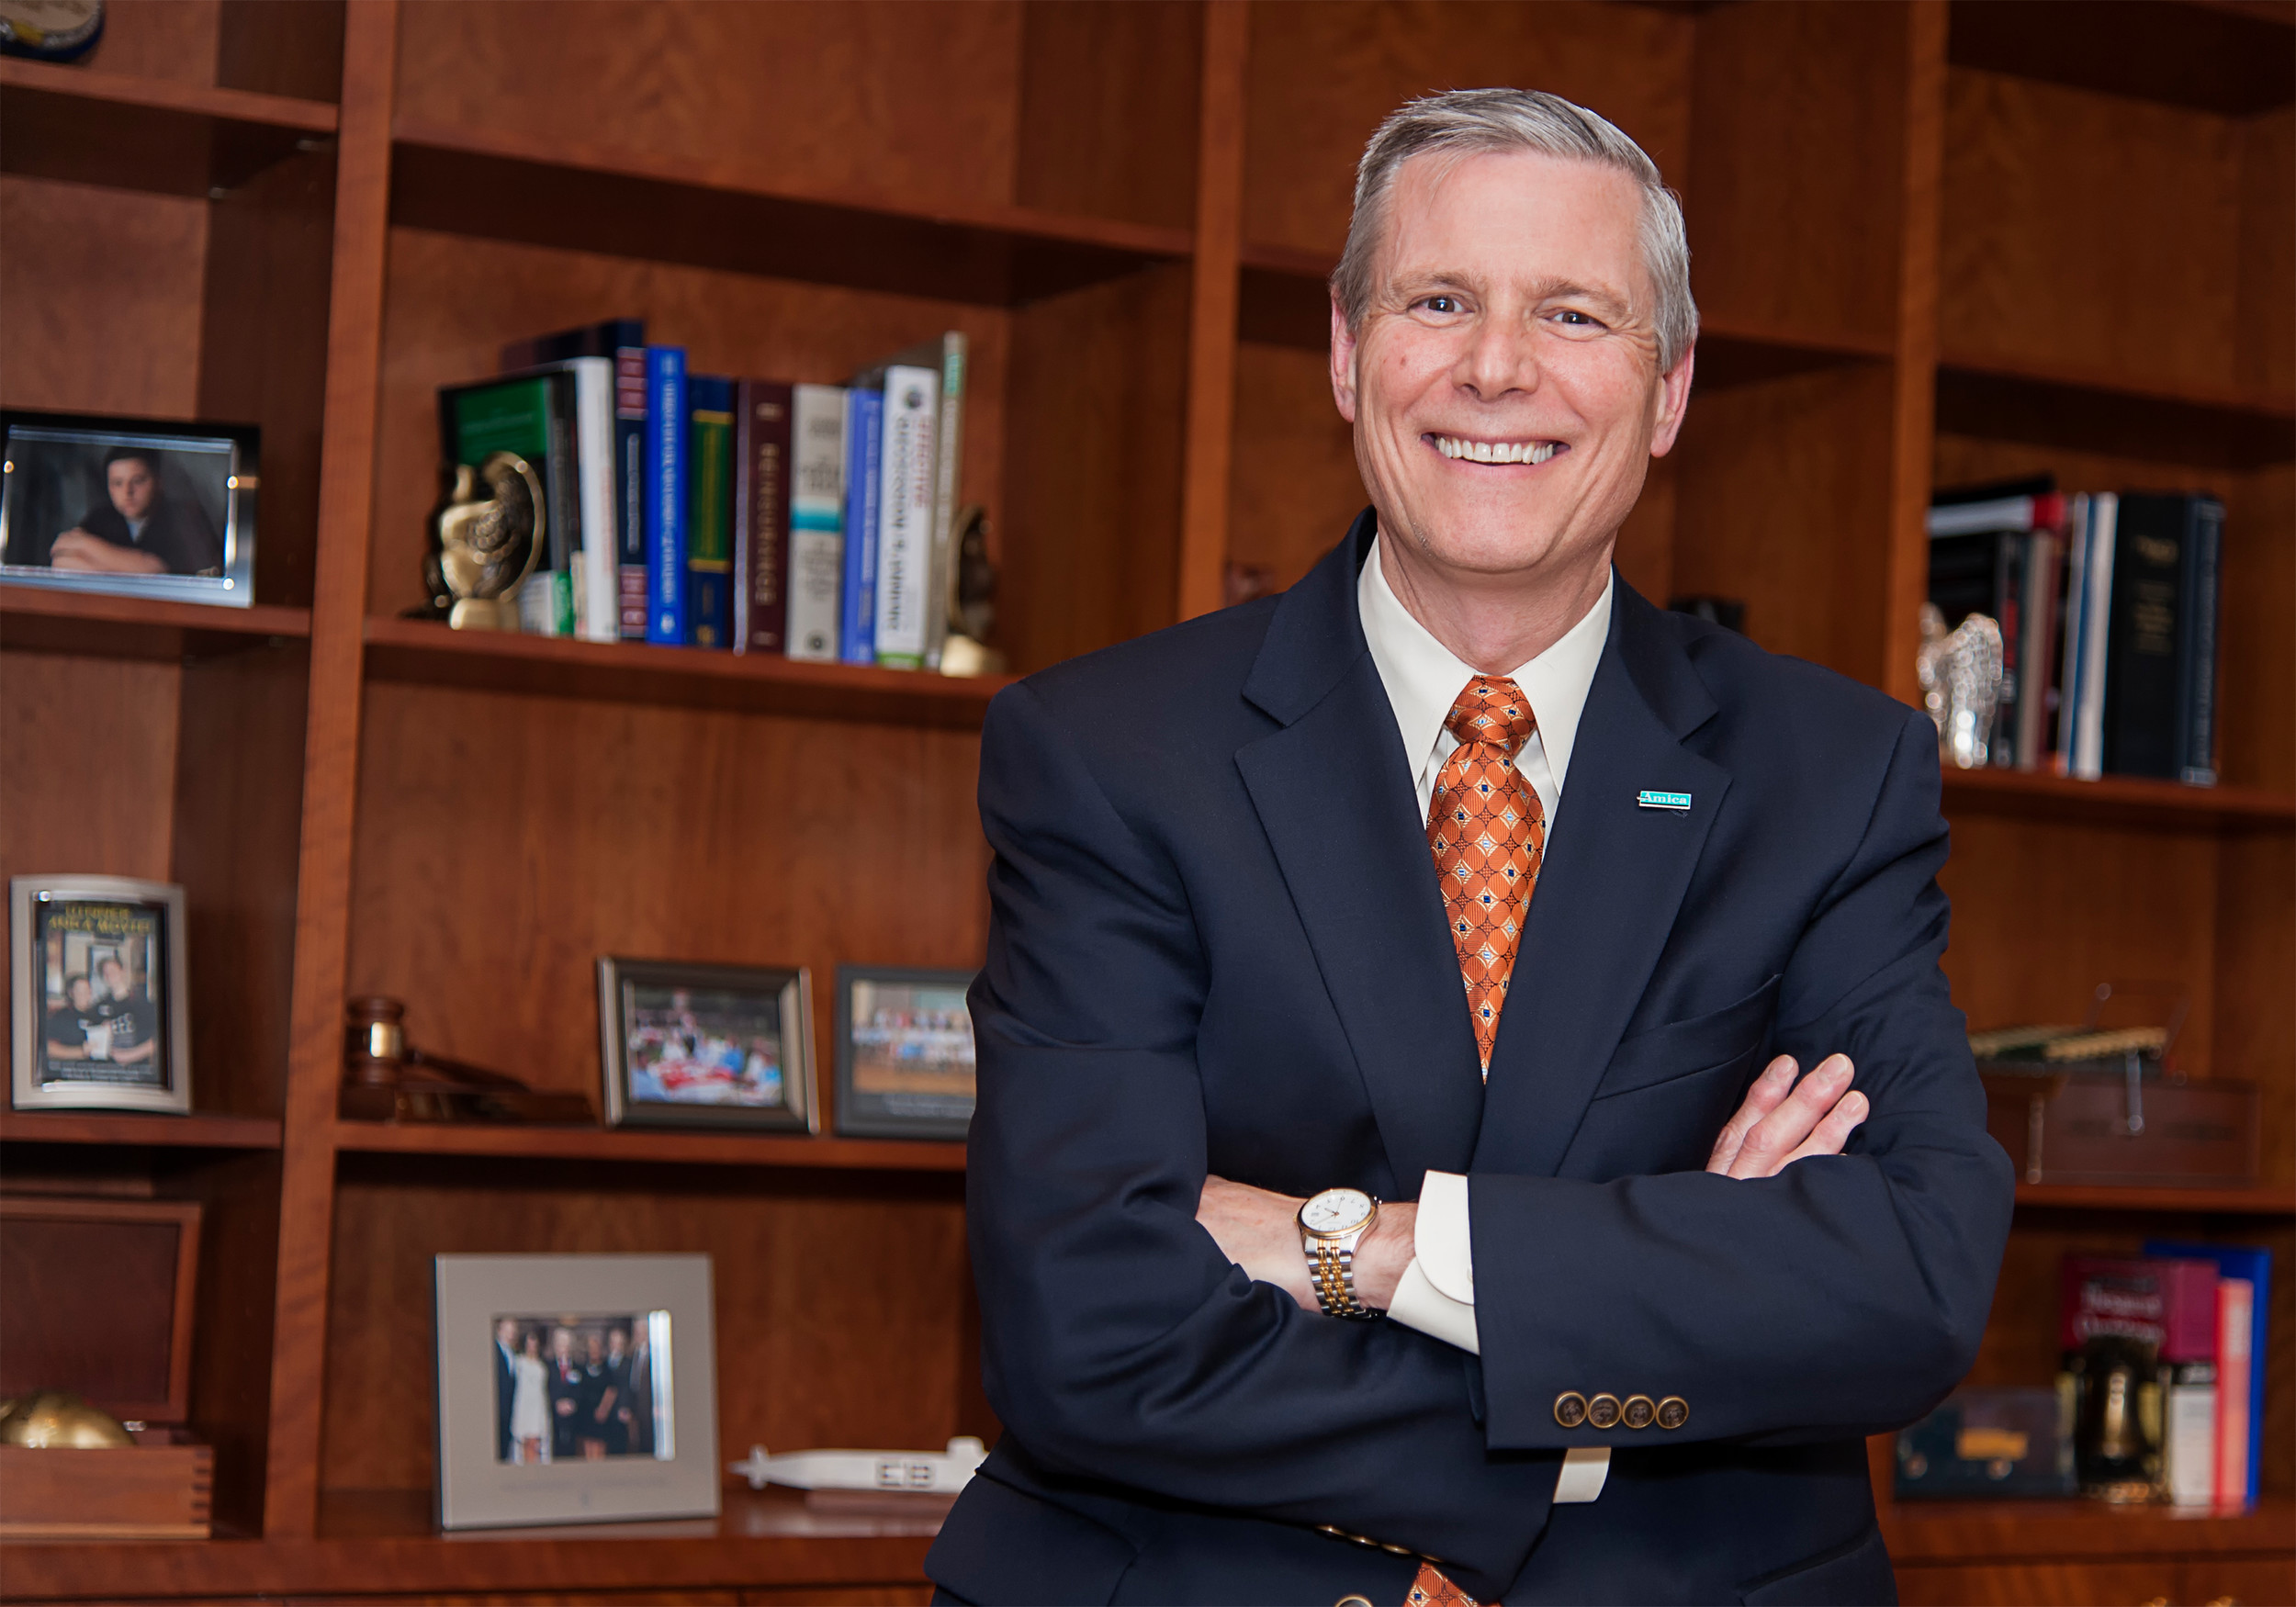 WORKING THE CORE: Amica Mutual Insurance Chairman, President and CEO Robert A. DiMuccio brings every aspect of the insurer's operations - technology, approach, people - back to making customer service its highest priority. / PBN PHOTOS/ MICHAEL SALERNO